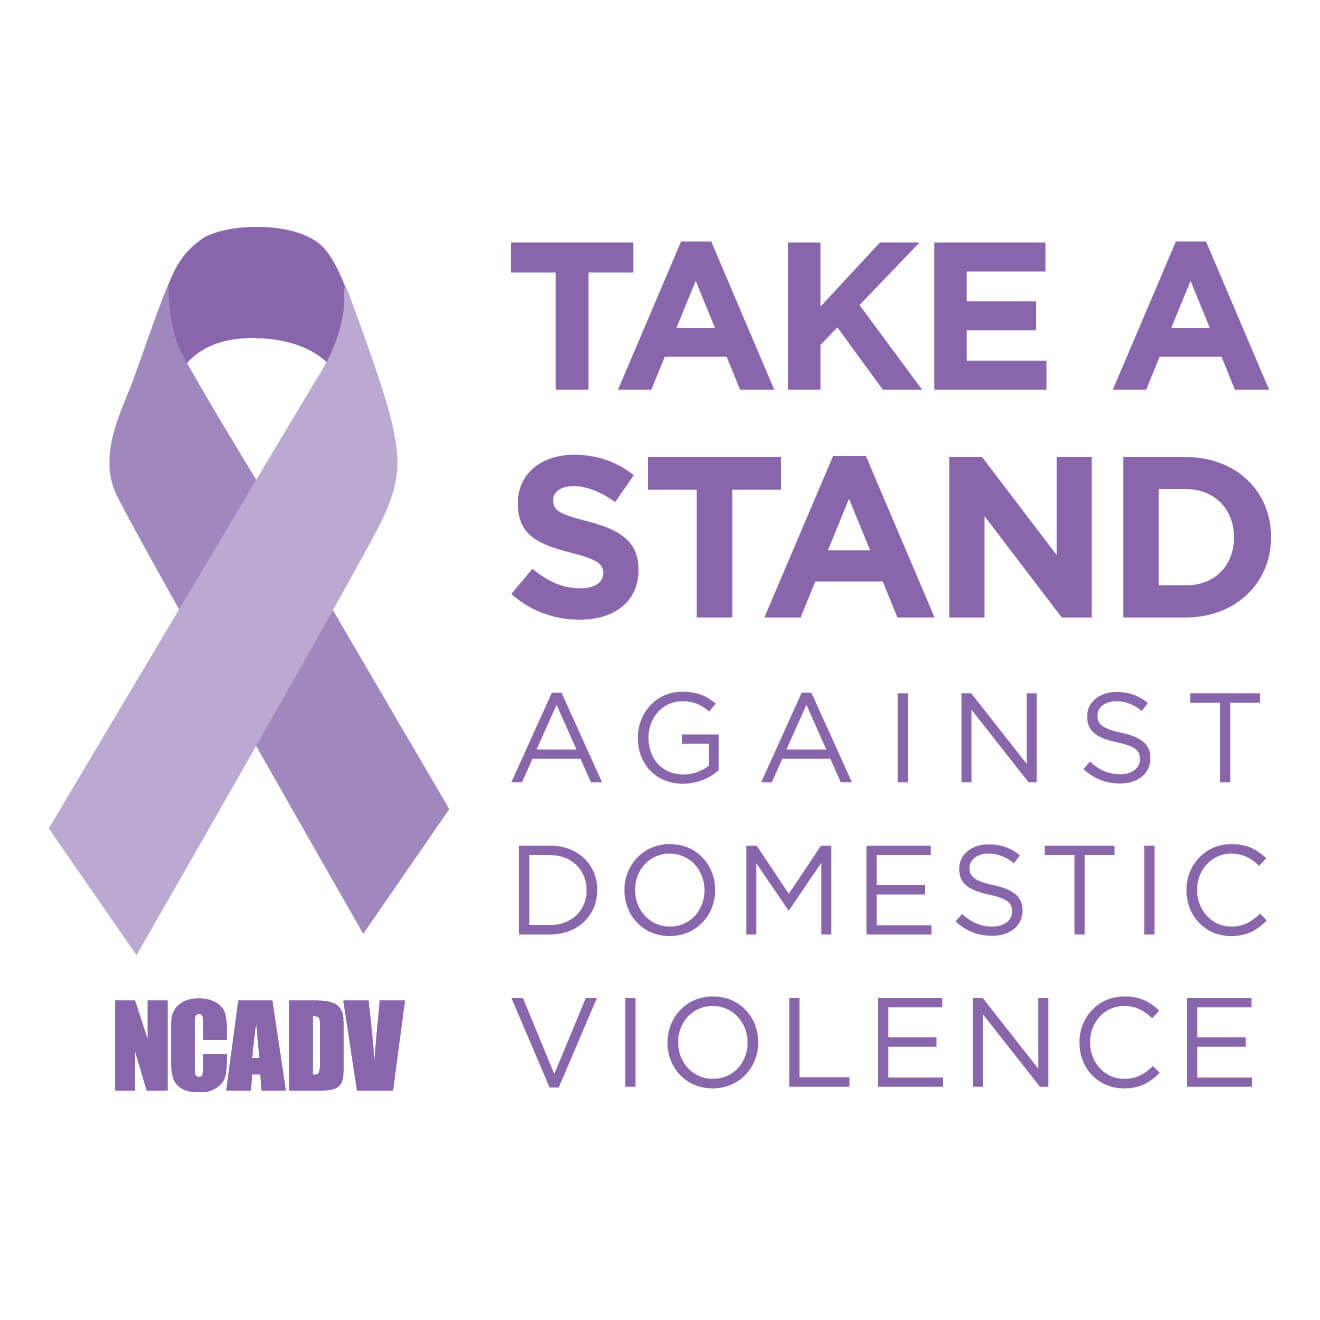 Take a stand against domestic violence